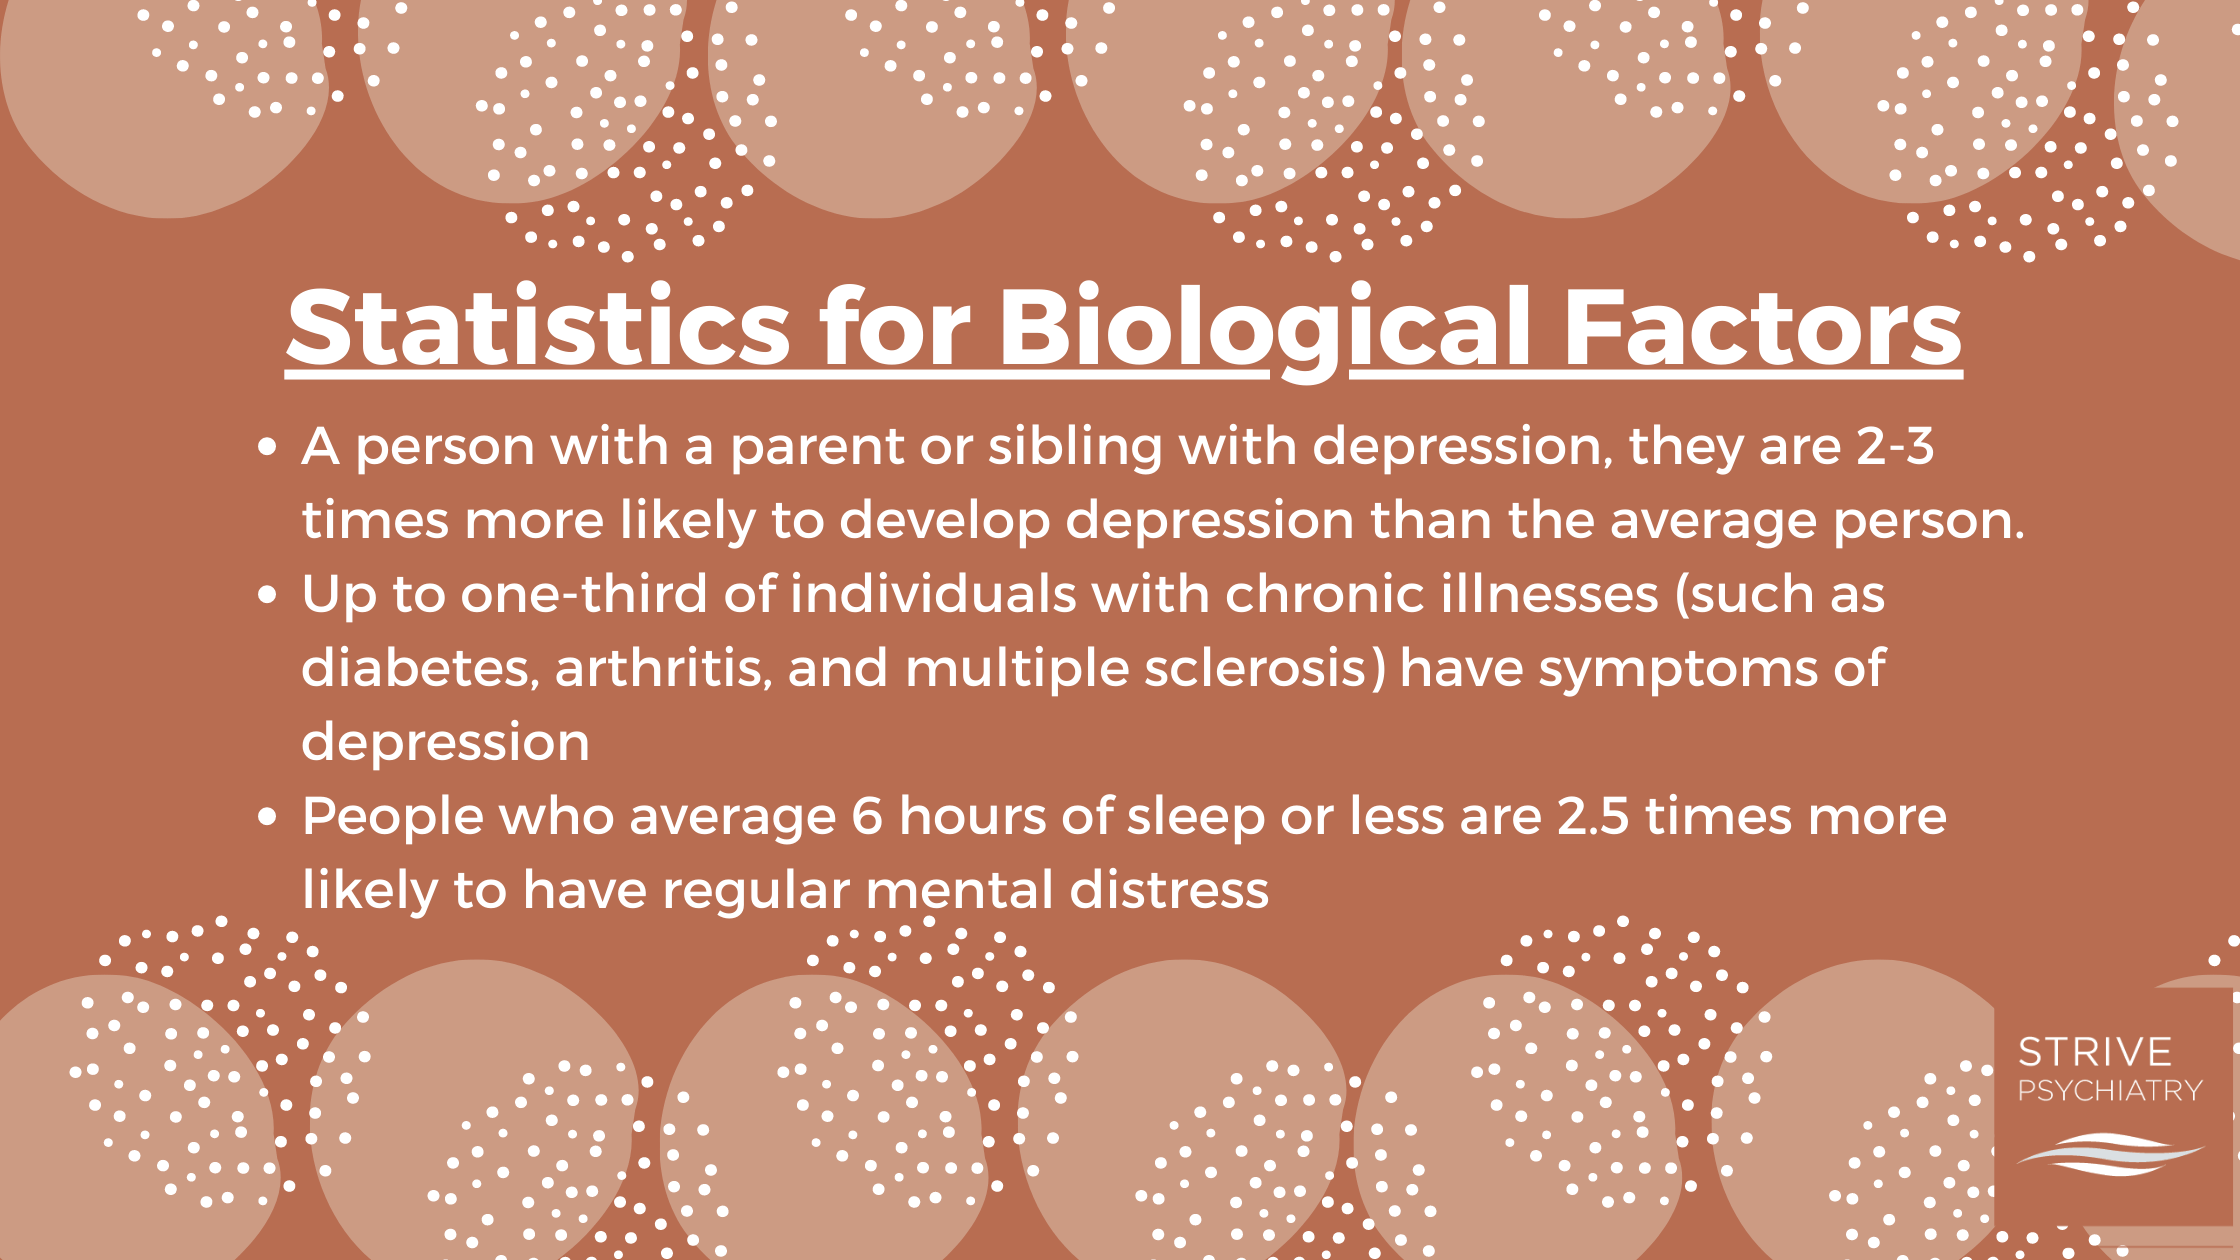 Info graphic that says "Statistics for Biological factors. A person with a parent or sibling with depression, they are 2-3 times more likely to develop depression than the average person. Up to one-third of individuals with chronic illnesses (such as diabetes, arthritis, and multiple sclerosis) have symptoms of depression People who average 6 hours of sleep or less are 2.5 times more likely to have regular mental distress."